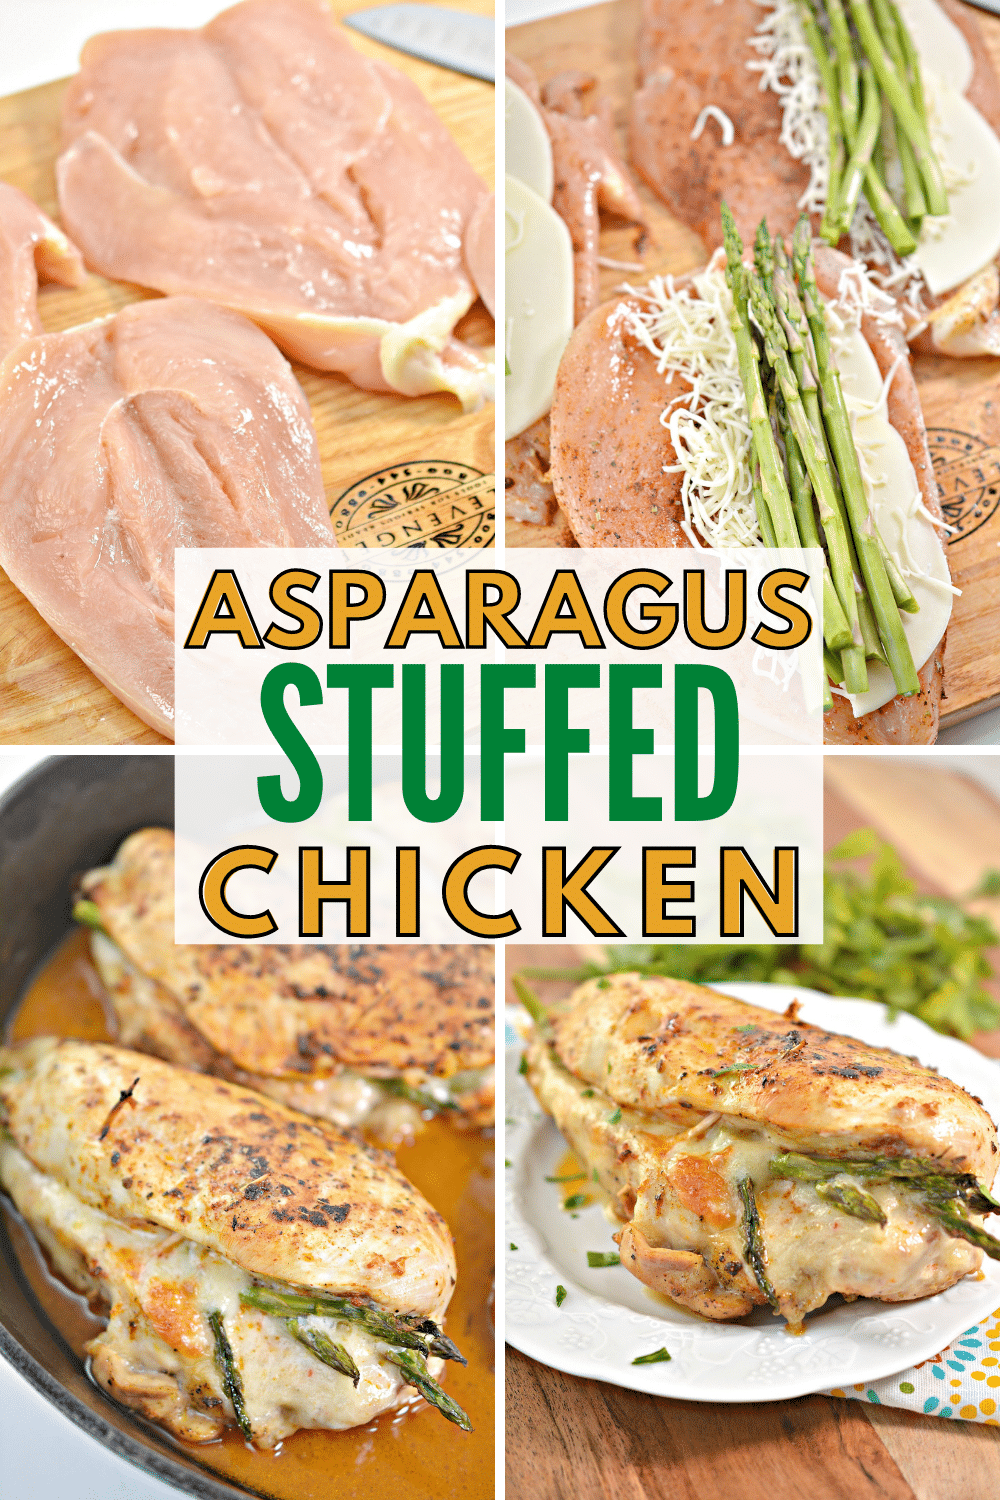 Asparagus Stuffed Chicken is an elegant and low carb dinner recipe that is perfect for guests. The flavors of asparagus, seasonings and chicken is divine. #asparagus #chicken #lowcarb via @wondermomwannab